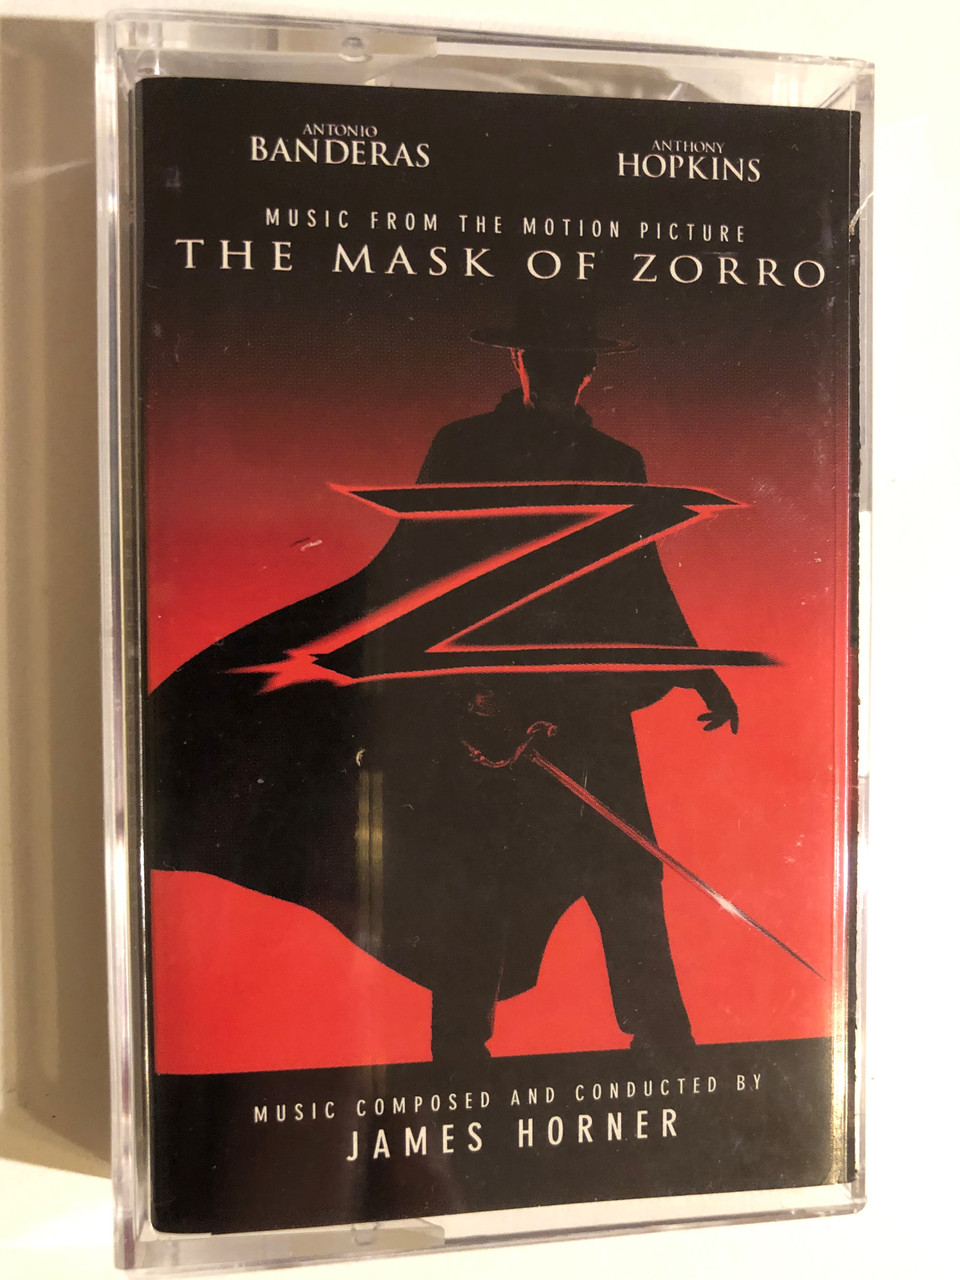 https://cdn10.bigcommerce.com/s-62bdpkt7pb/products/0/images/265418/The_Mask_Of_Zorro_Music_From_The_Motion_Picture_-_Music_Composed_And_Conducted_By_James_Horner_Antonio_Banderas_Anthony_Hopkins_Sony_Classical_Audio_Cassette_1998_ST_60627_1__36872.1675244679.1280.1280.JPG?c=2&_gl=1*oh6gm2*_ga*MjA2NTIxMjE2MC4xNTkwNTEyNTMy*_ga_WS2VZYPC6G*MTY3NTIzNzgyNC43NDAuMS4xNjc1MjQ0NTAxLjIyLjAuMA..